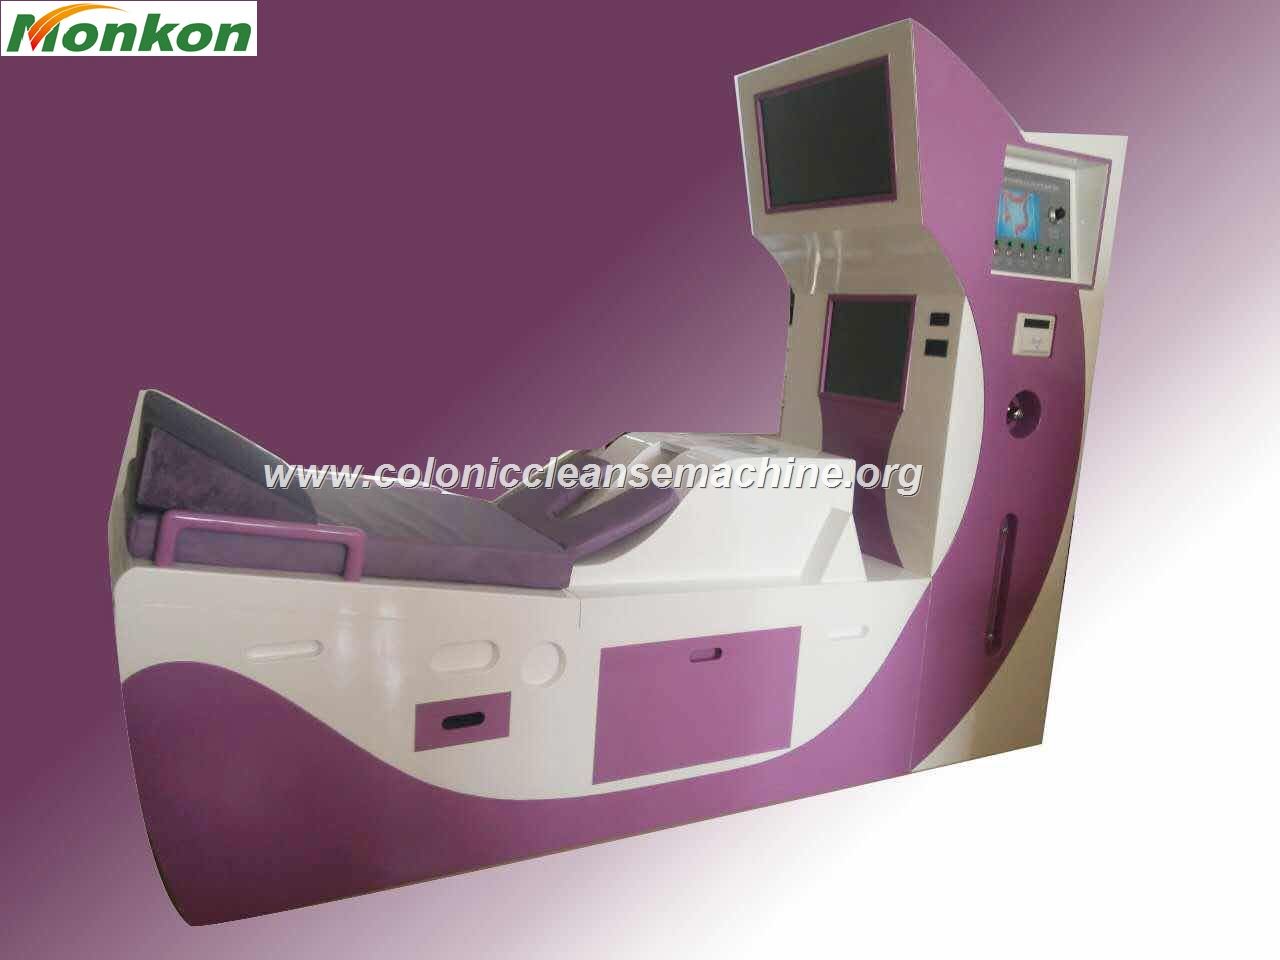 Where to buy MAIKONG colonic irrigation equipment MAIKONG colon cleansing machine price